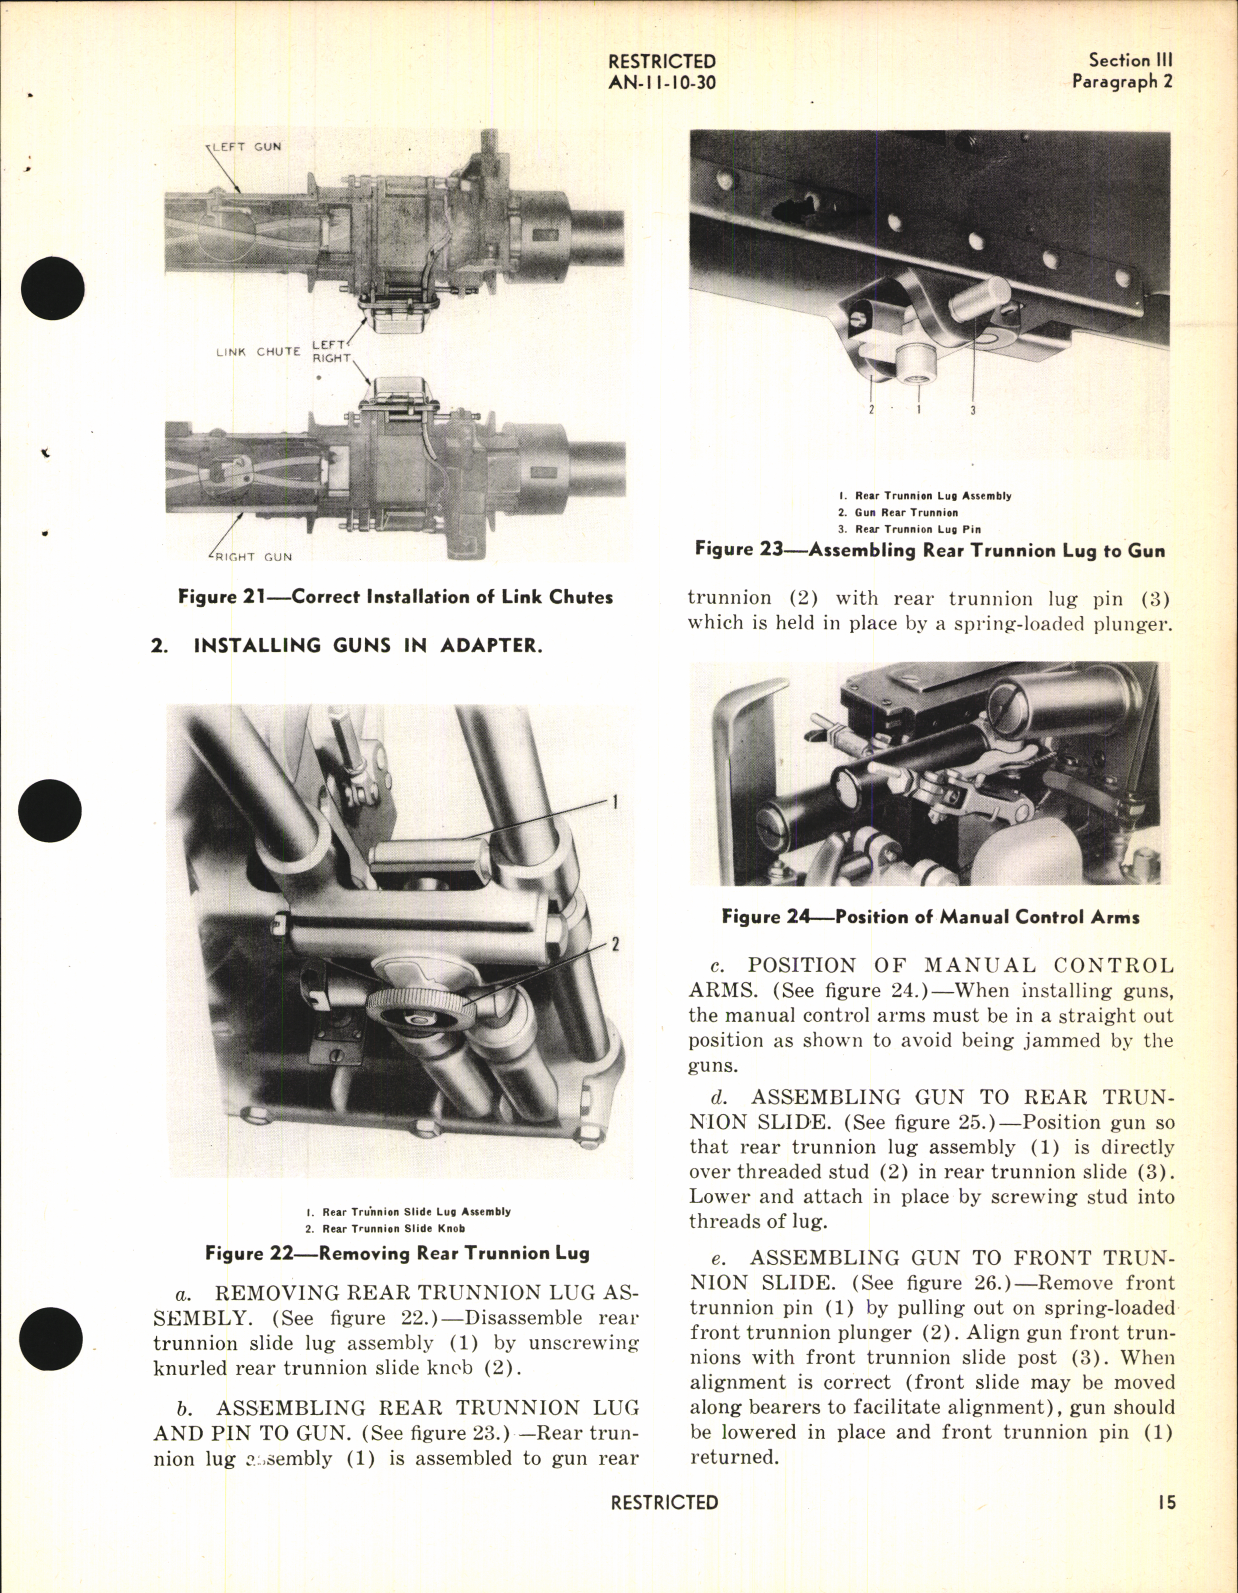 Sample page 7 from AirCorps Library document: Operation, Service, & Overhaul Instructions with Parts Catalog for Gun Mount Type M-8A